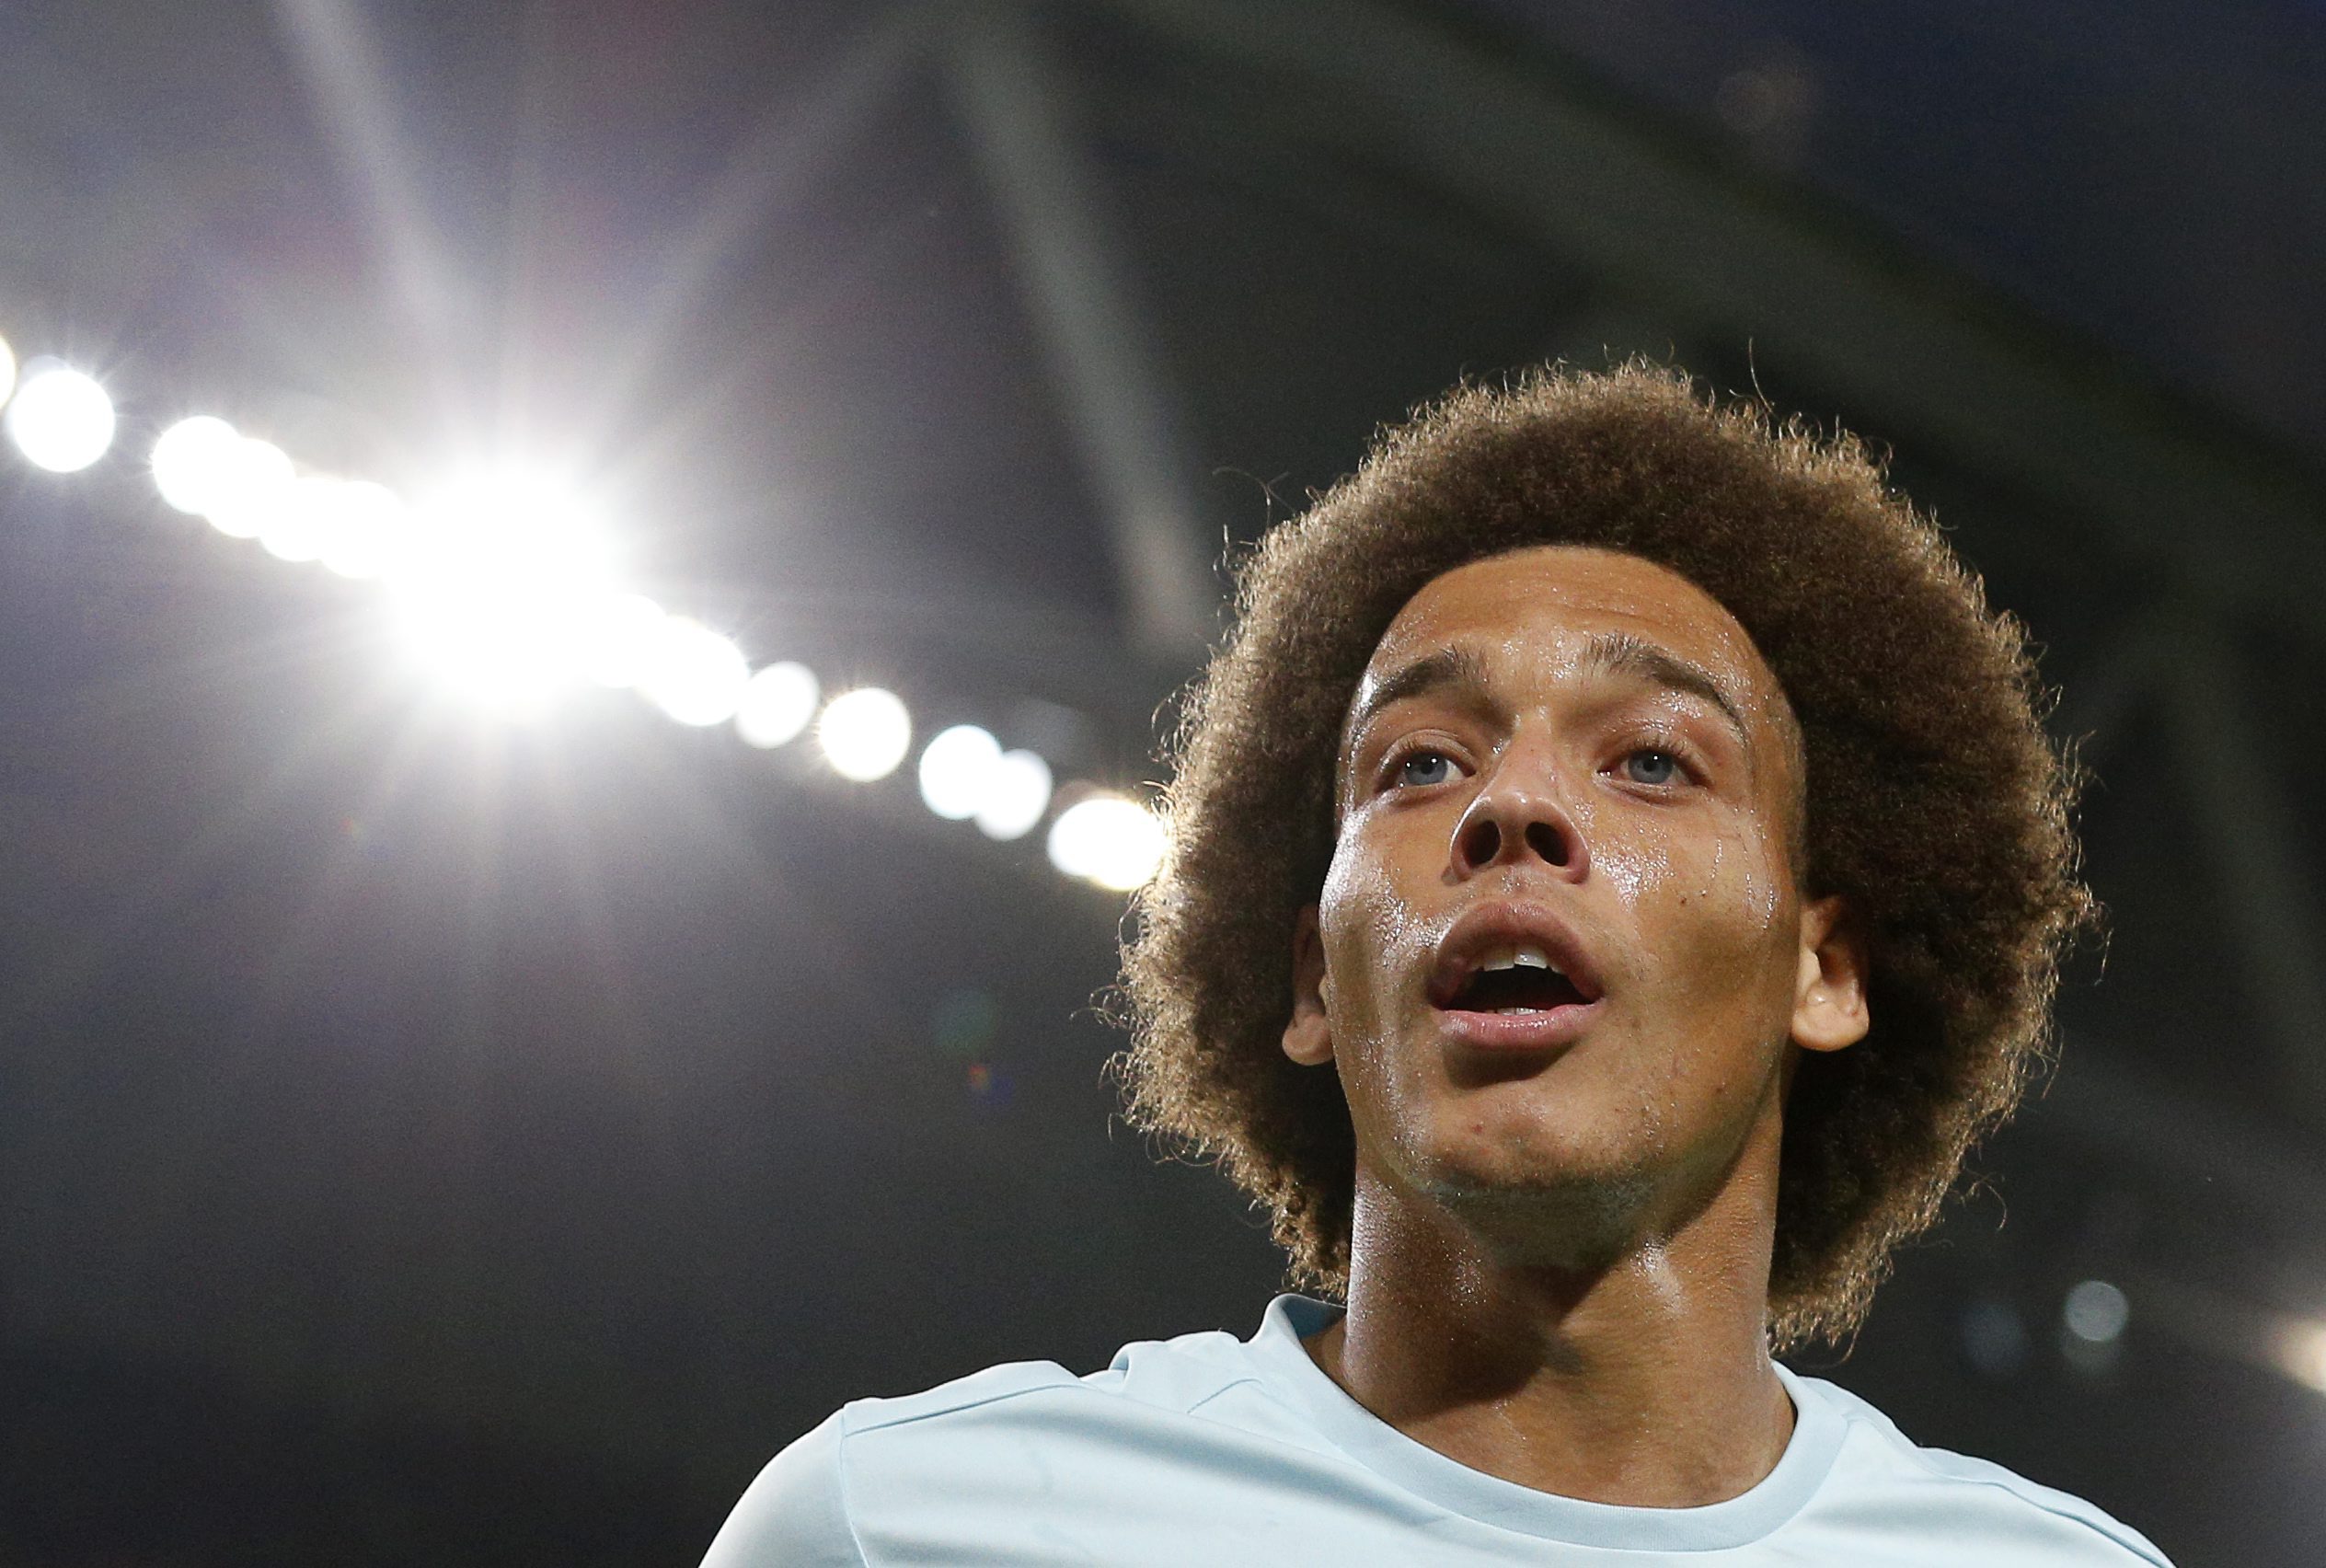 2016-07-01 21:03:51 epa05402295 Axel Witsel of Belgium reacts during the UEFA EURO 2016 quarter final match between Wales and Belgium at Stade Pierre Mauroy in Lille Metropole, France, 01 July 2016. (RESTRICTIONS APPLY: For editorial news reporting purposes only. Not used for commercial or marketing purposes without prior written approval of UEFA. Images must appear as still images and must not emulate match action video footage. Photographs published in online publications (whether via the Internet or otherwise) shall have an interval of at least 20 seconds between the posting.) EPA/LAURENT DUBRULE EDITORIAL USE ONLY